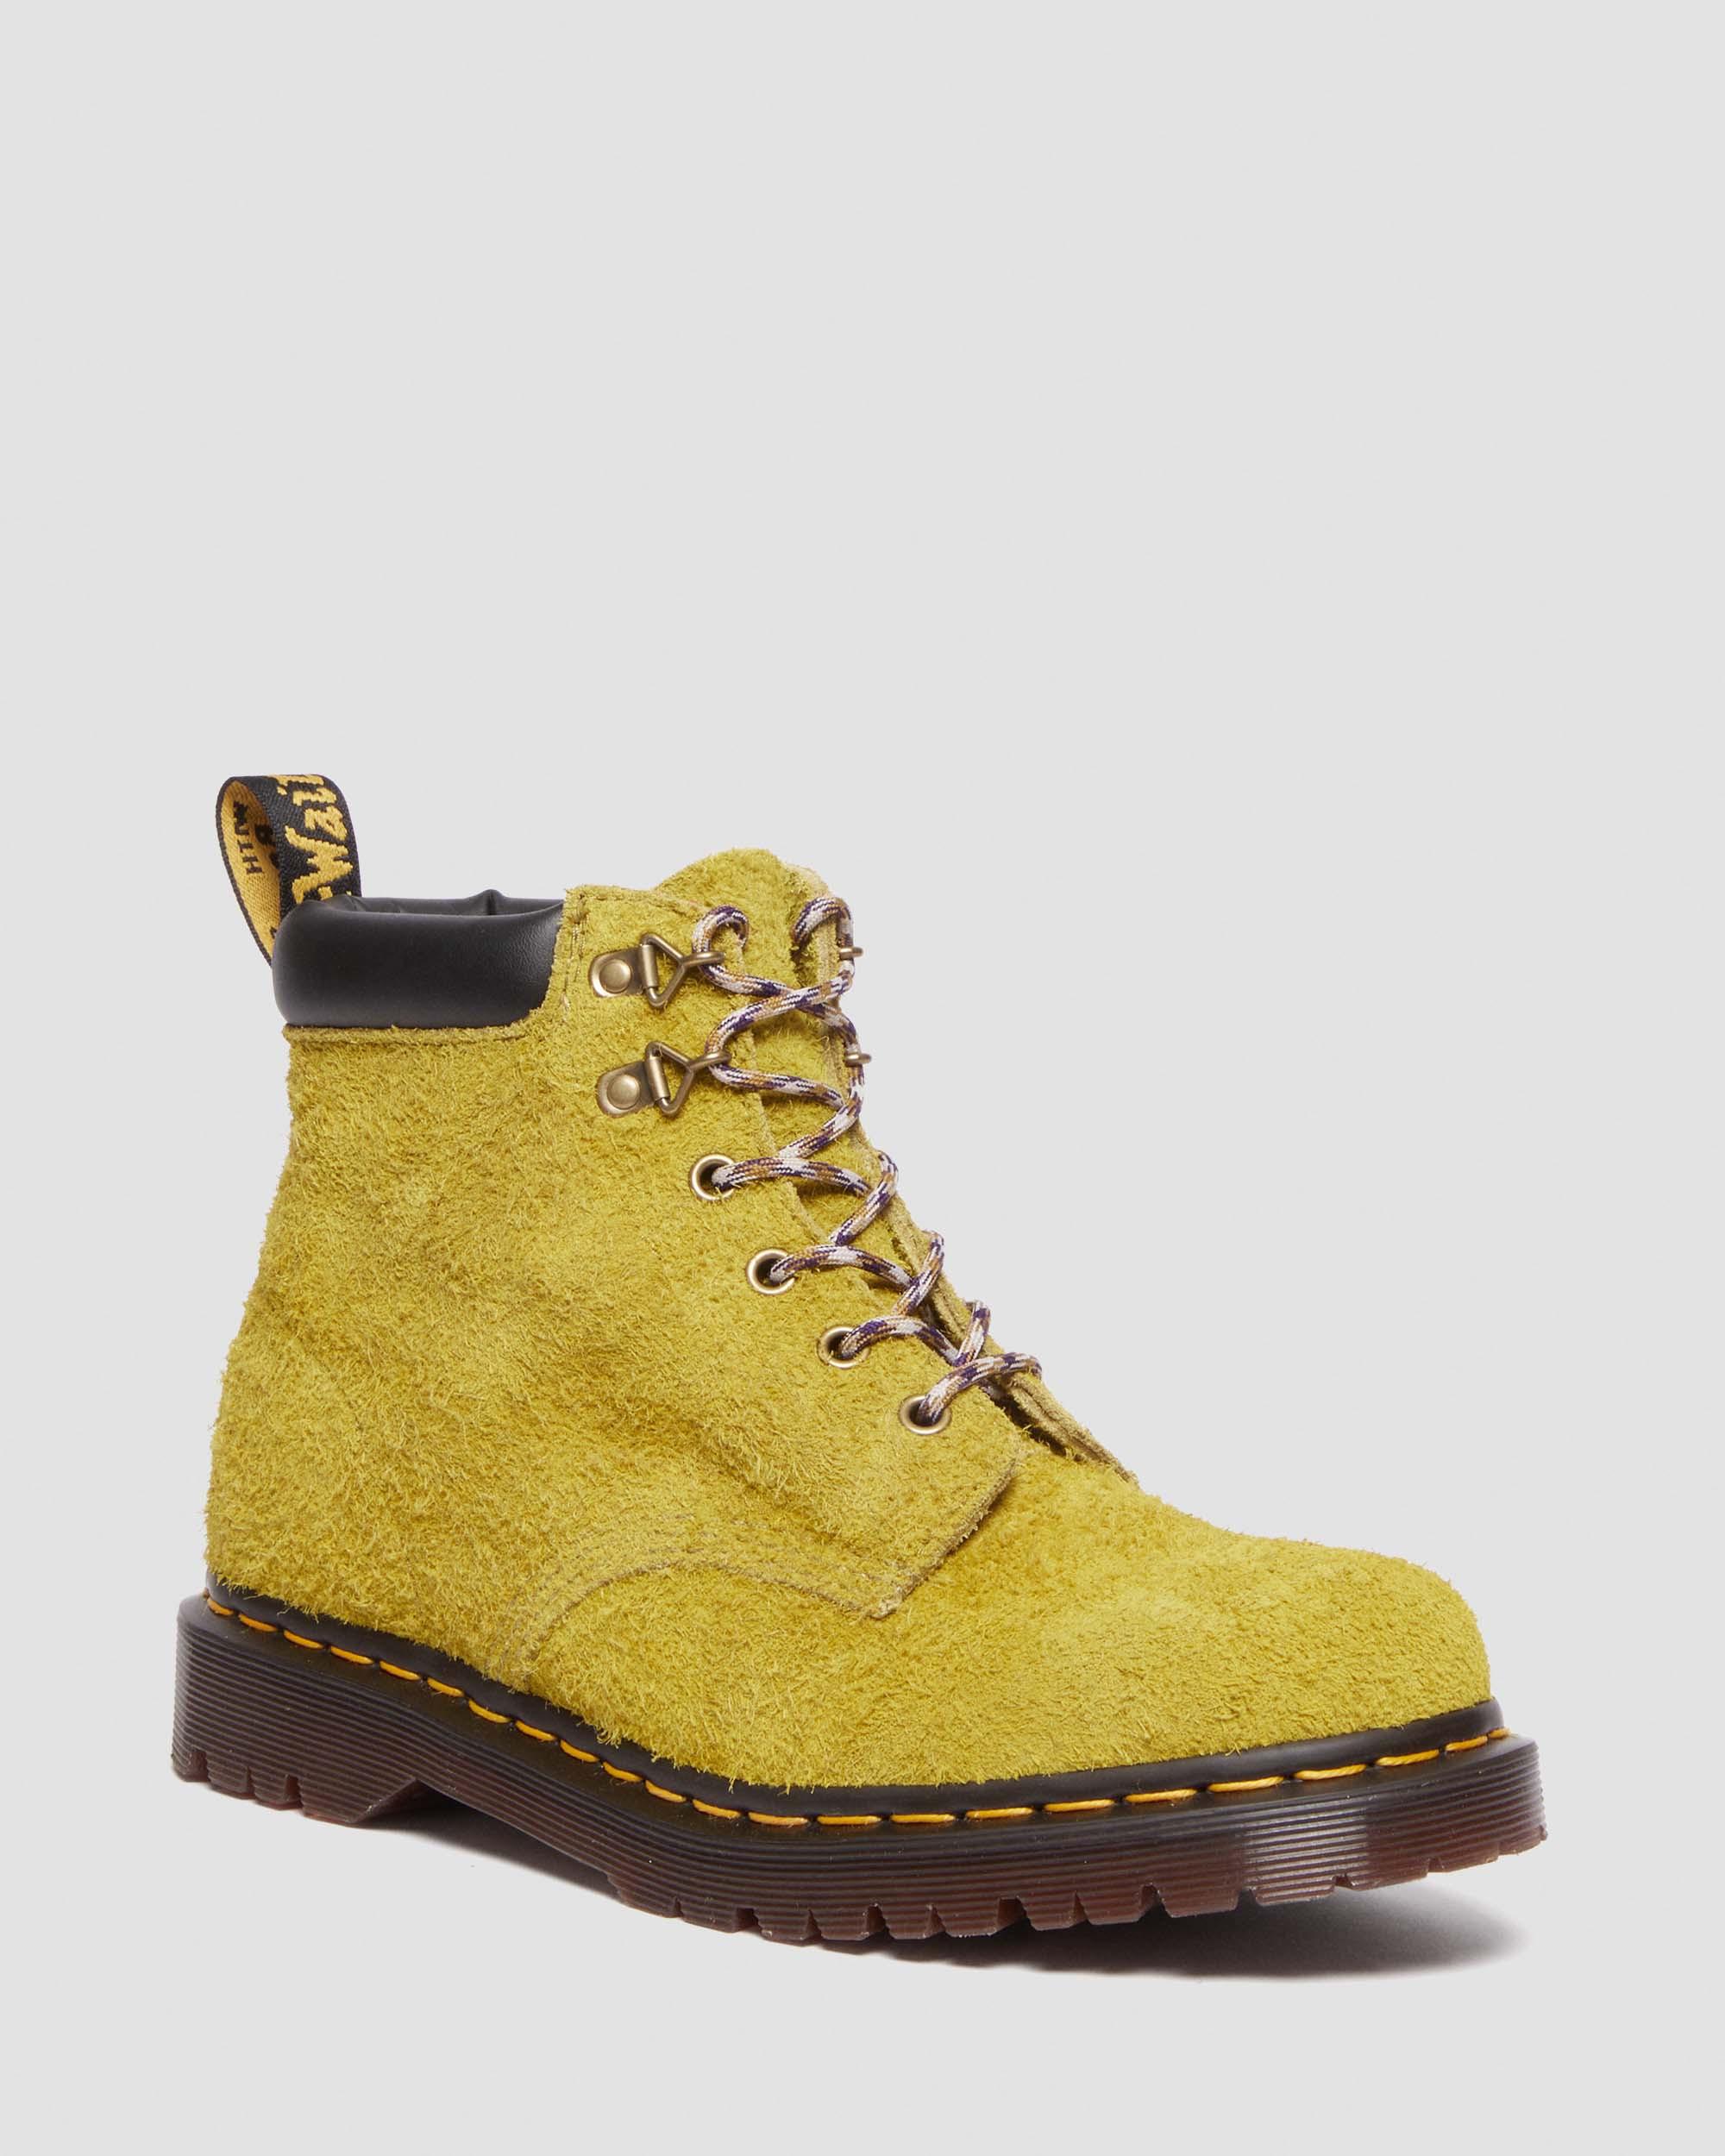 939 Ben Suede Style Boots | Dr. Martens